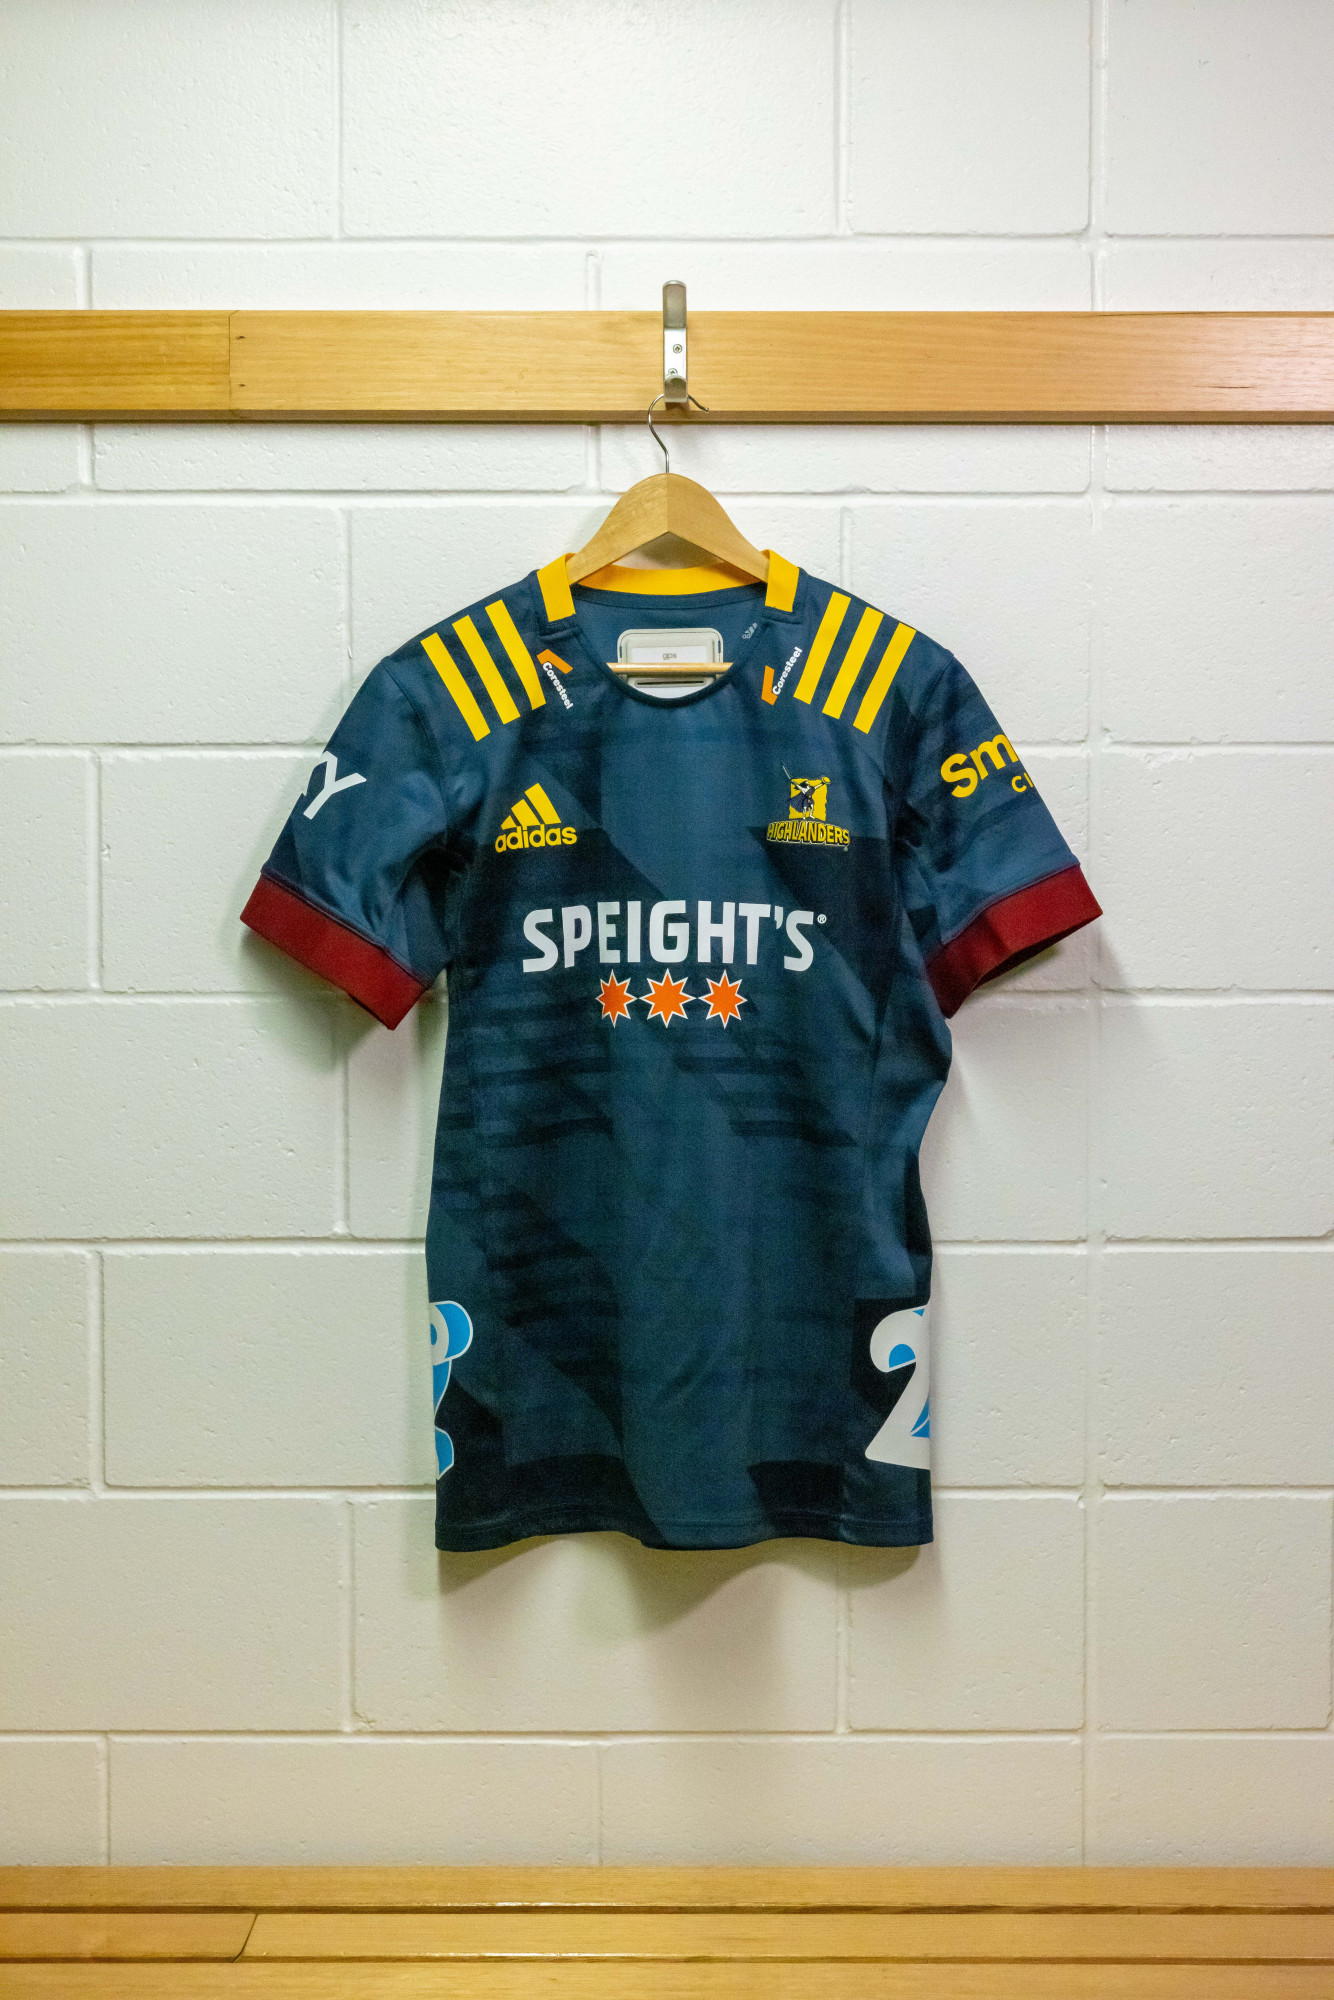 Introducing the Speight's Highlanders for 2021! | Highlanders Rugby Club Limited Partnership